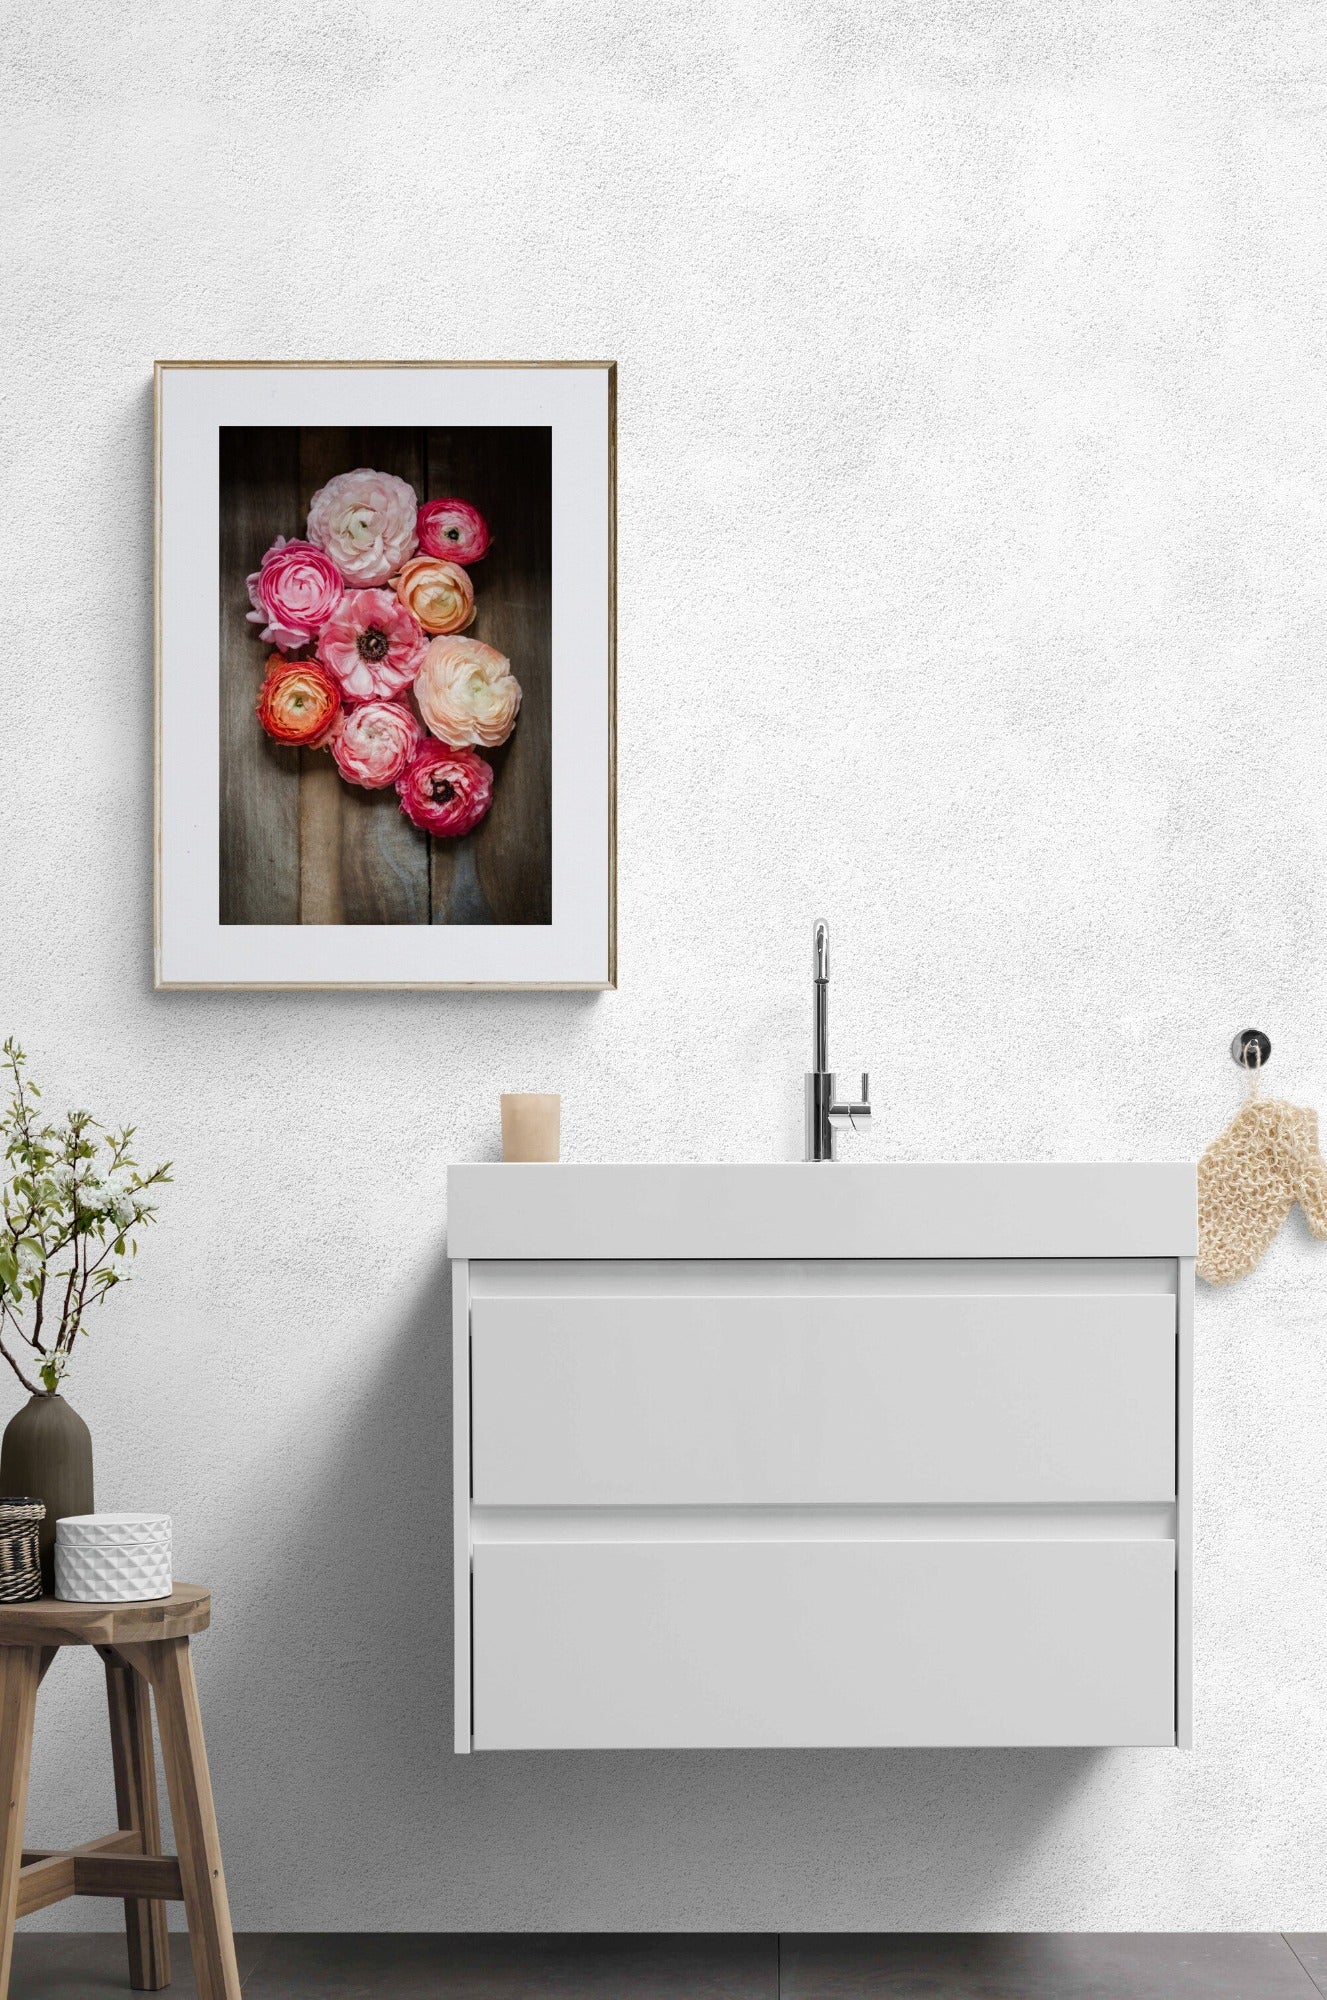 ranunculus flowers photograph print with shades of pinks in a bathroom as wall art